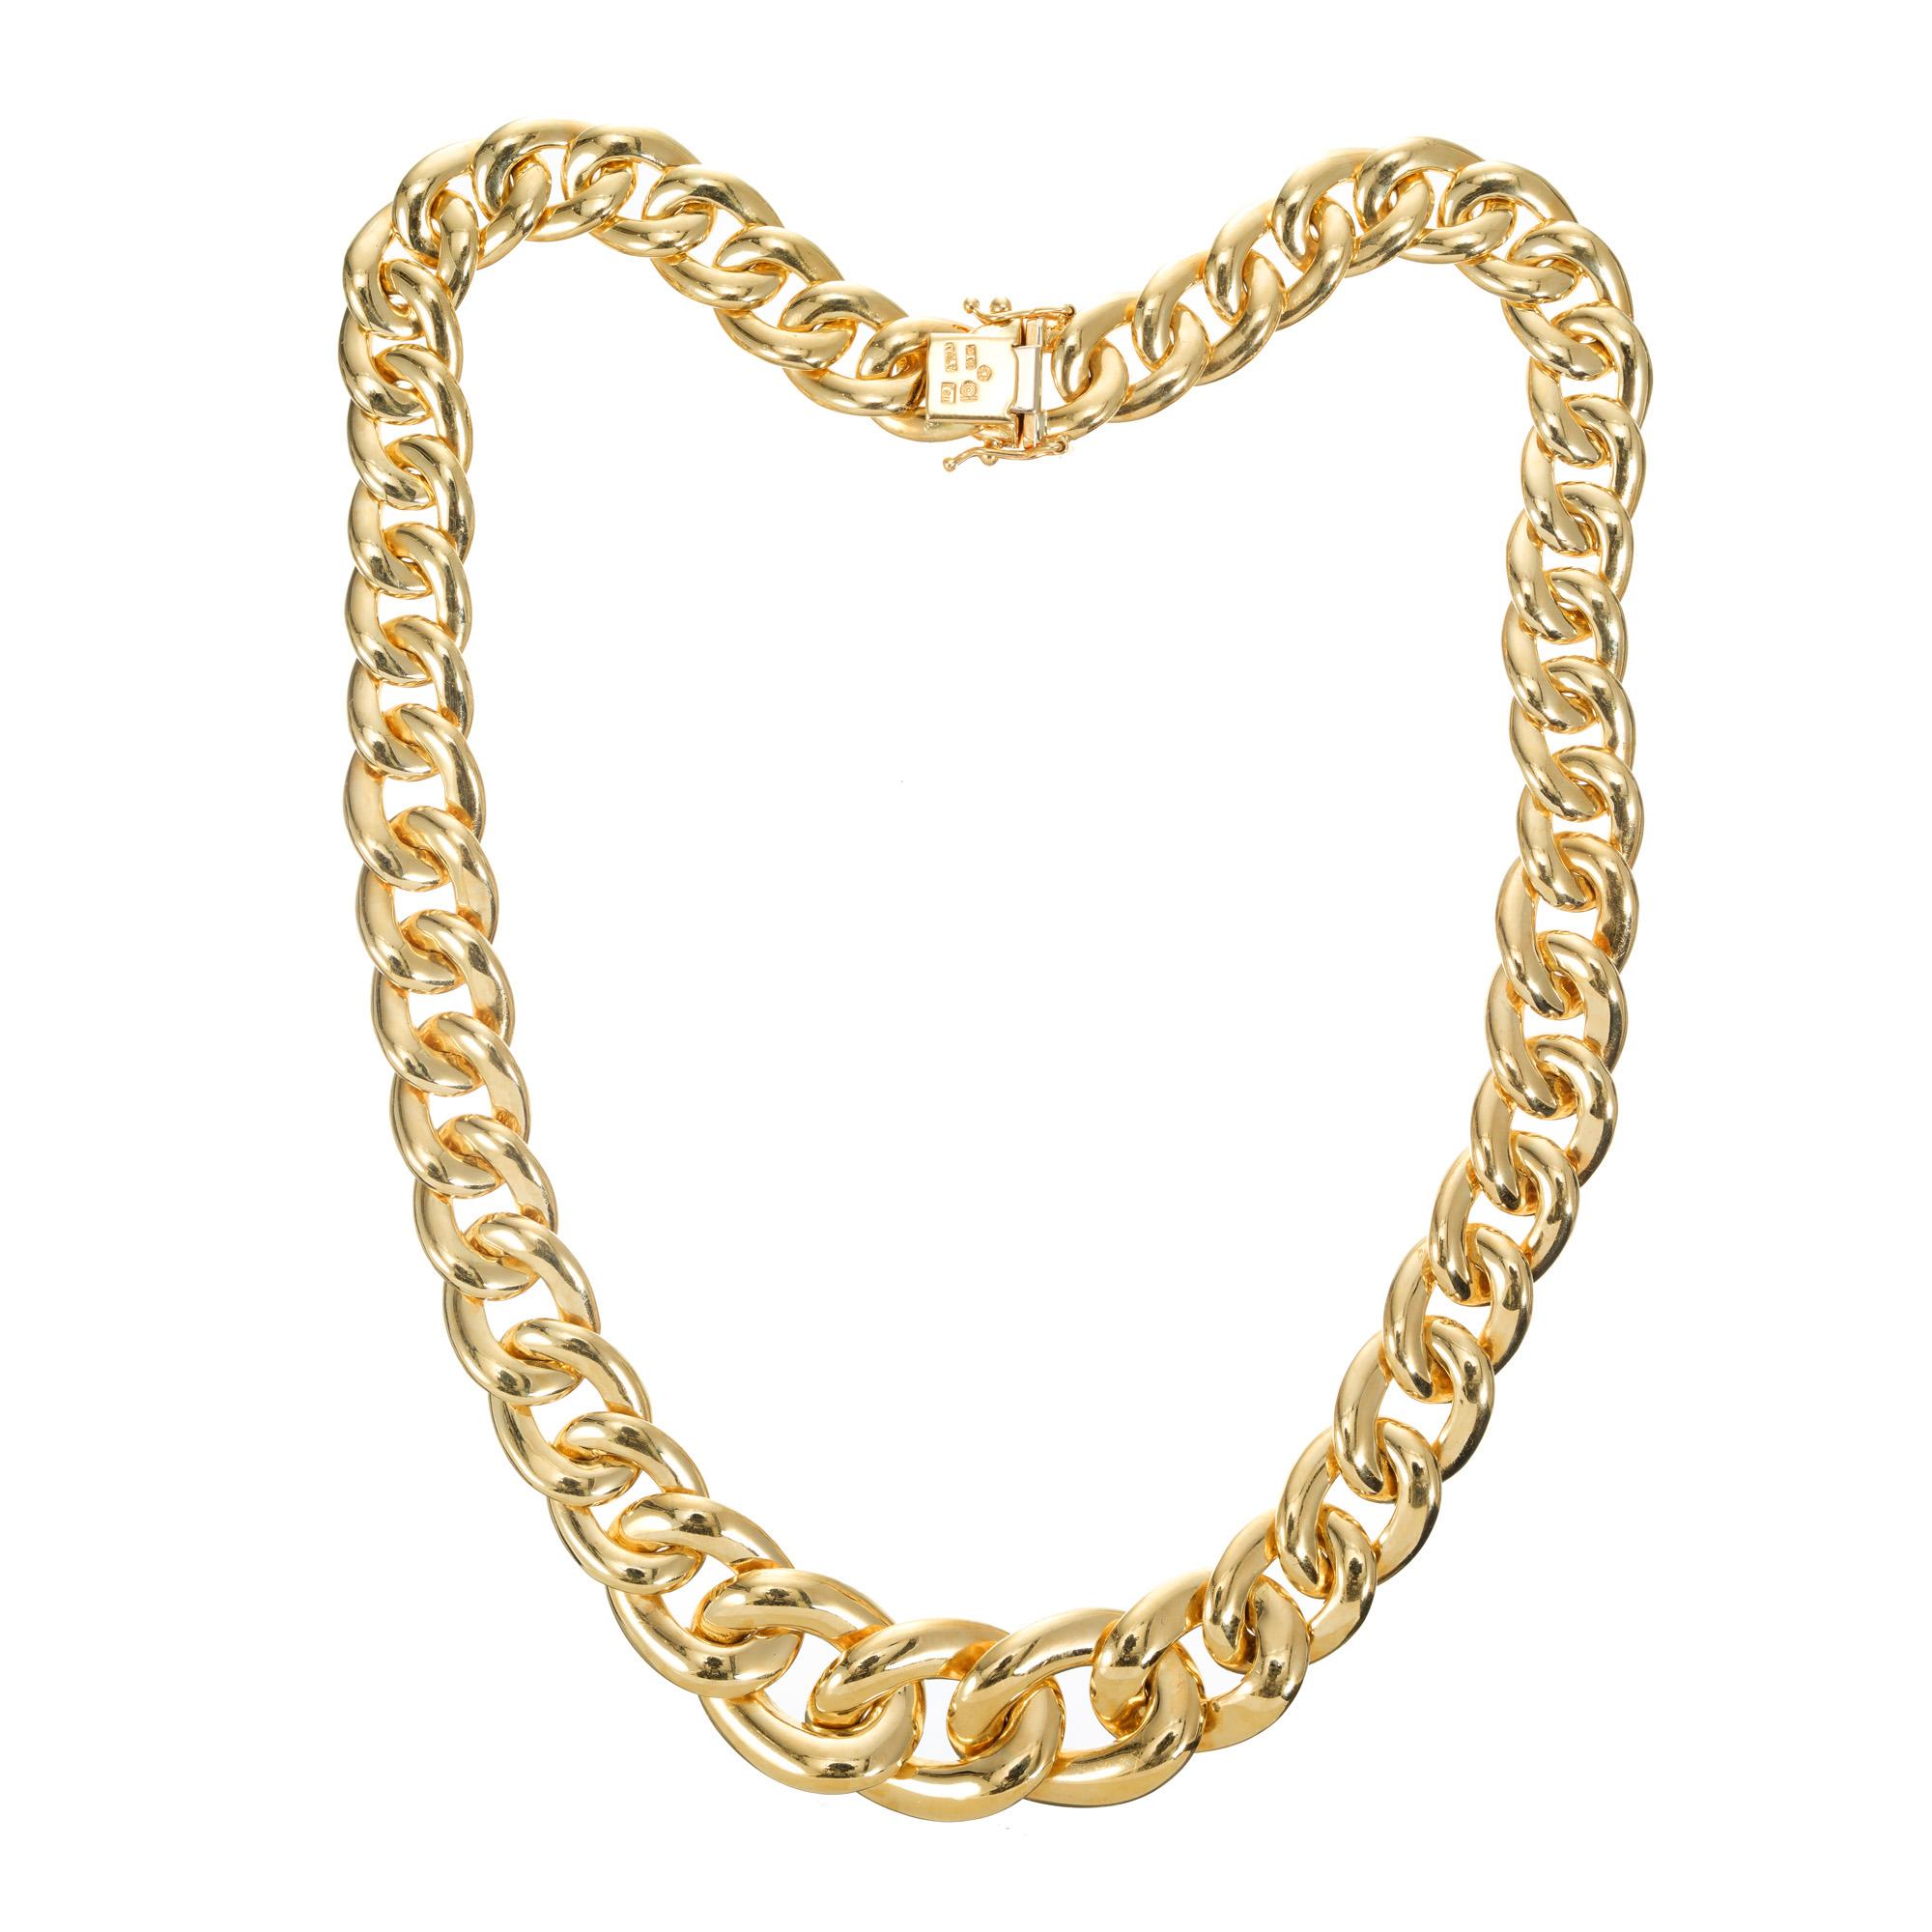 tiffany graduated link necklace